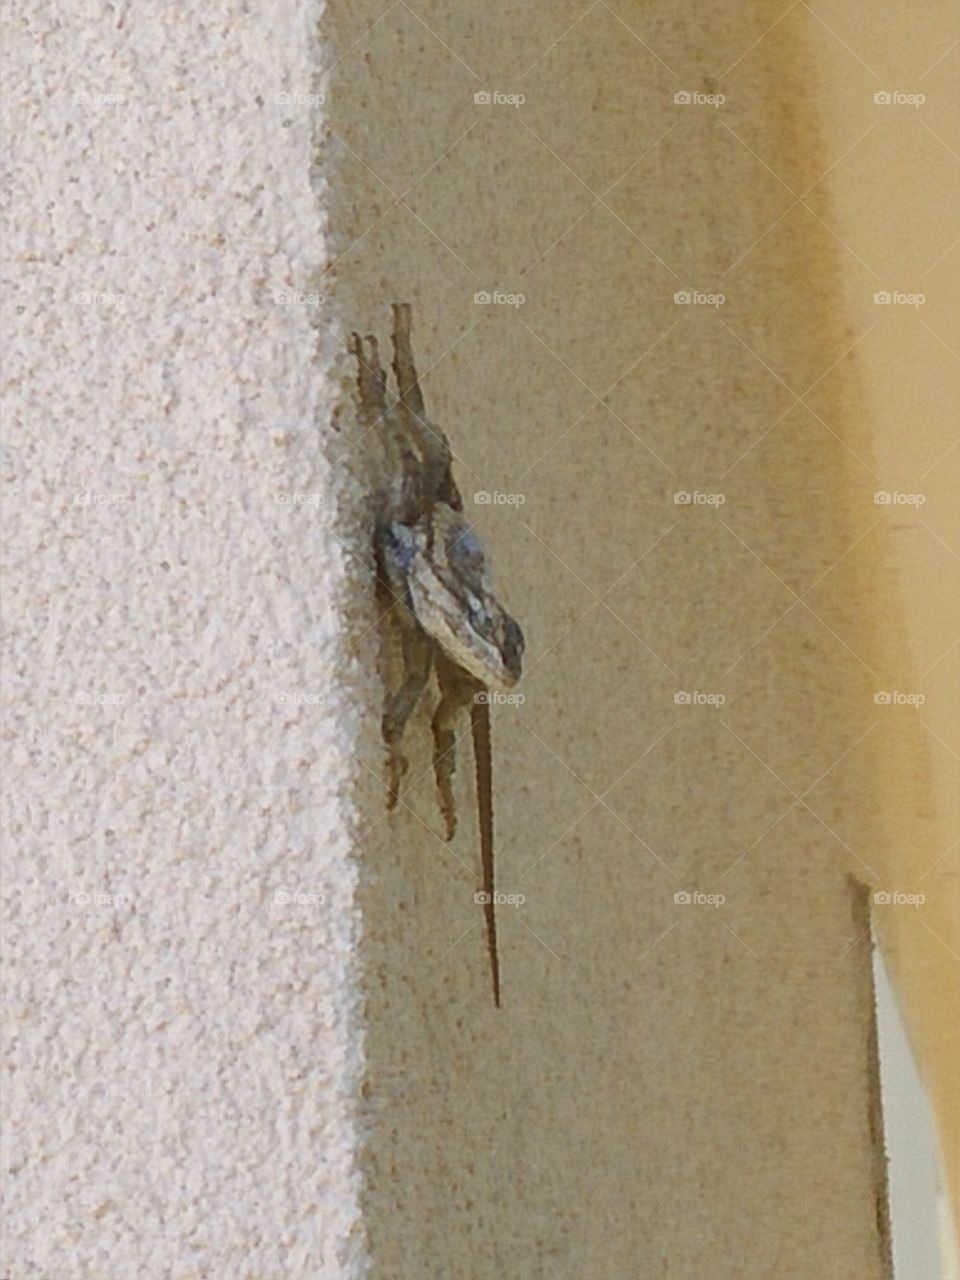 This little lizard chilled on the side of the house while I washed some windows.